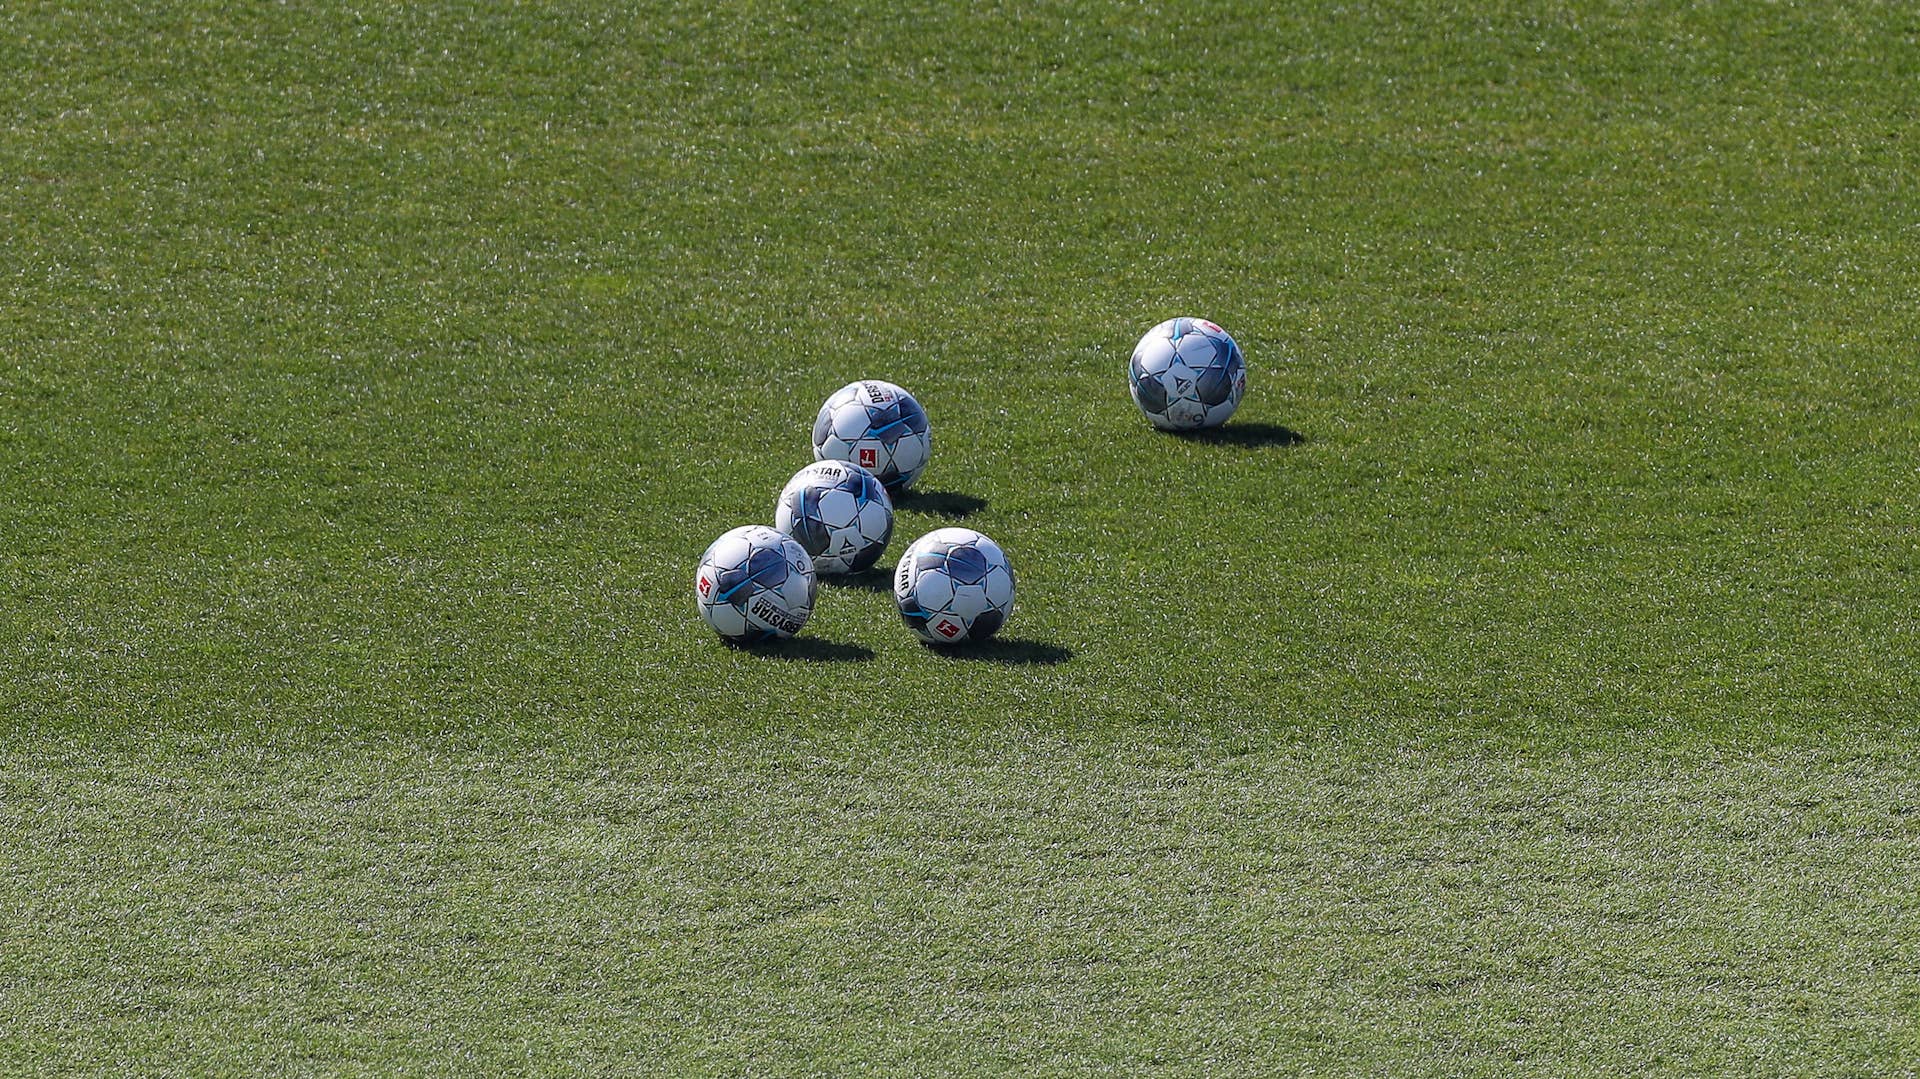 Five balls are lying on the grass of FC Schalke's training facility